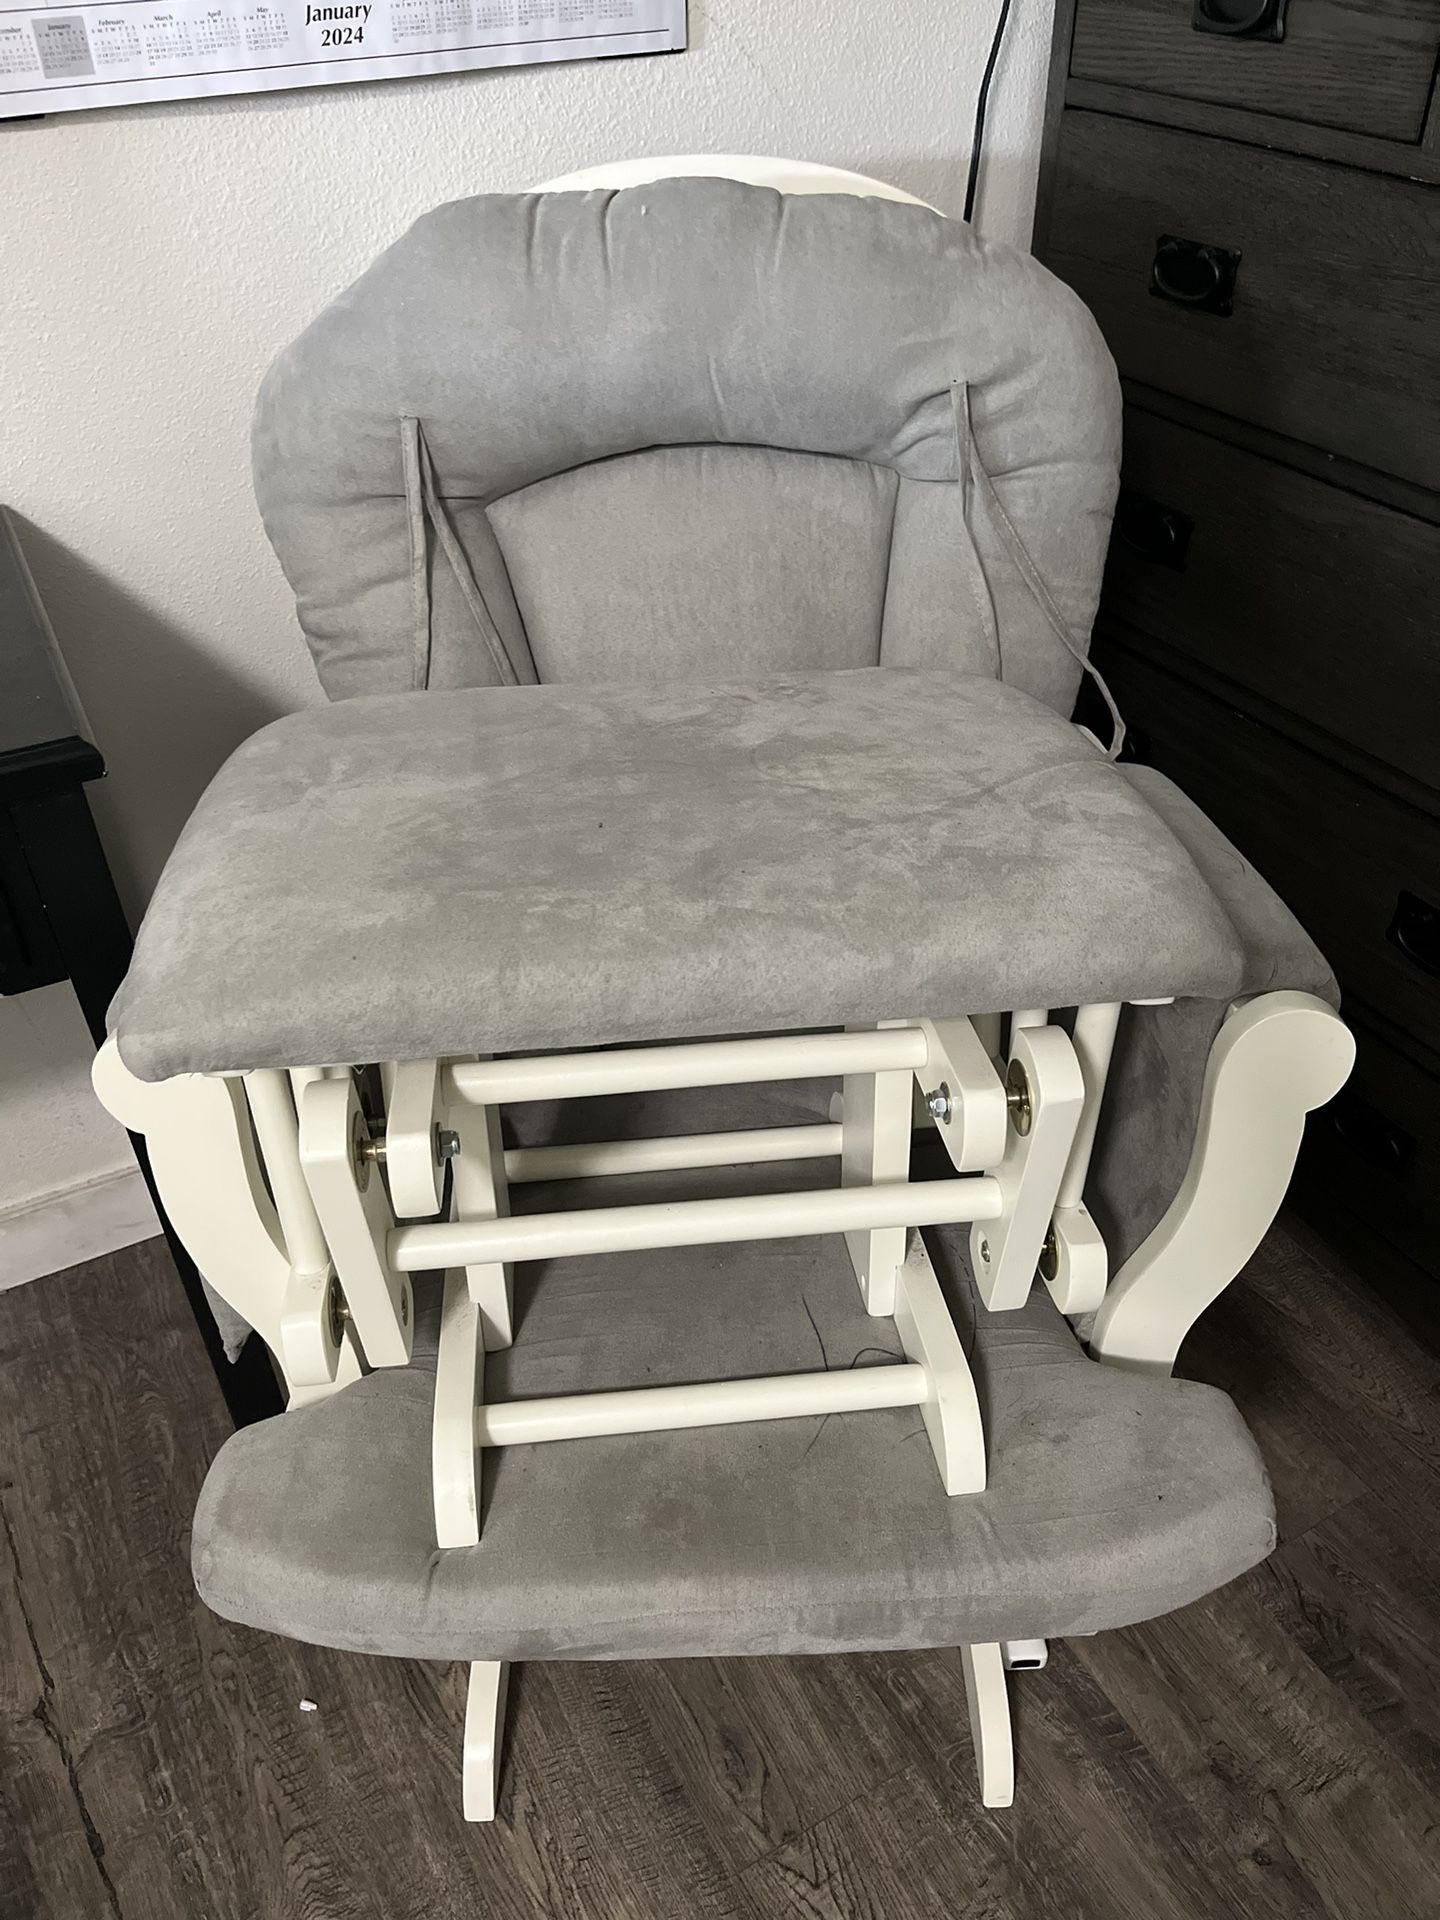 Nursing Gliding Chair With Food Stool